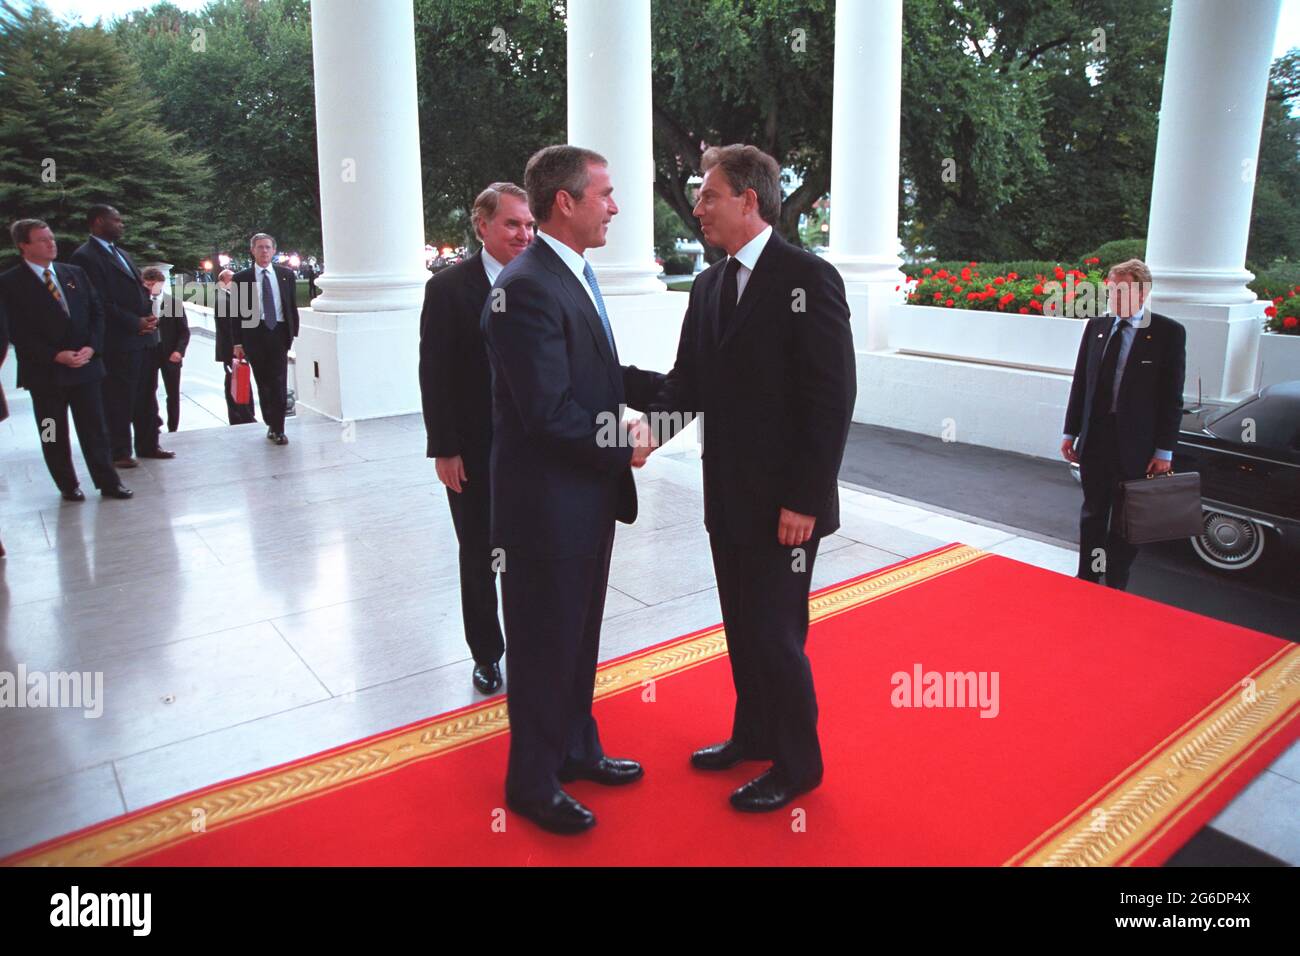 President George W. Bush greets Prime Minister Tony Blair Thursday, Sept. 20, 2001, at the North Portico entrance of the White House.  Photo by Eric Draper, Courtesy of the George W. Bush Presidential Library Stock Photo